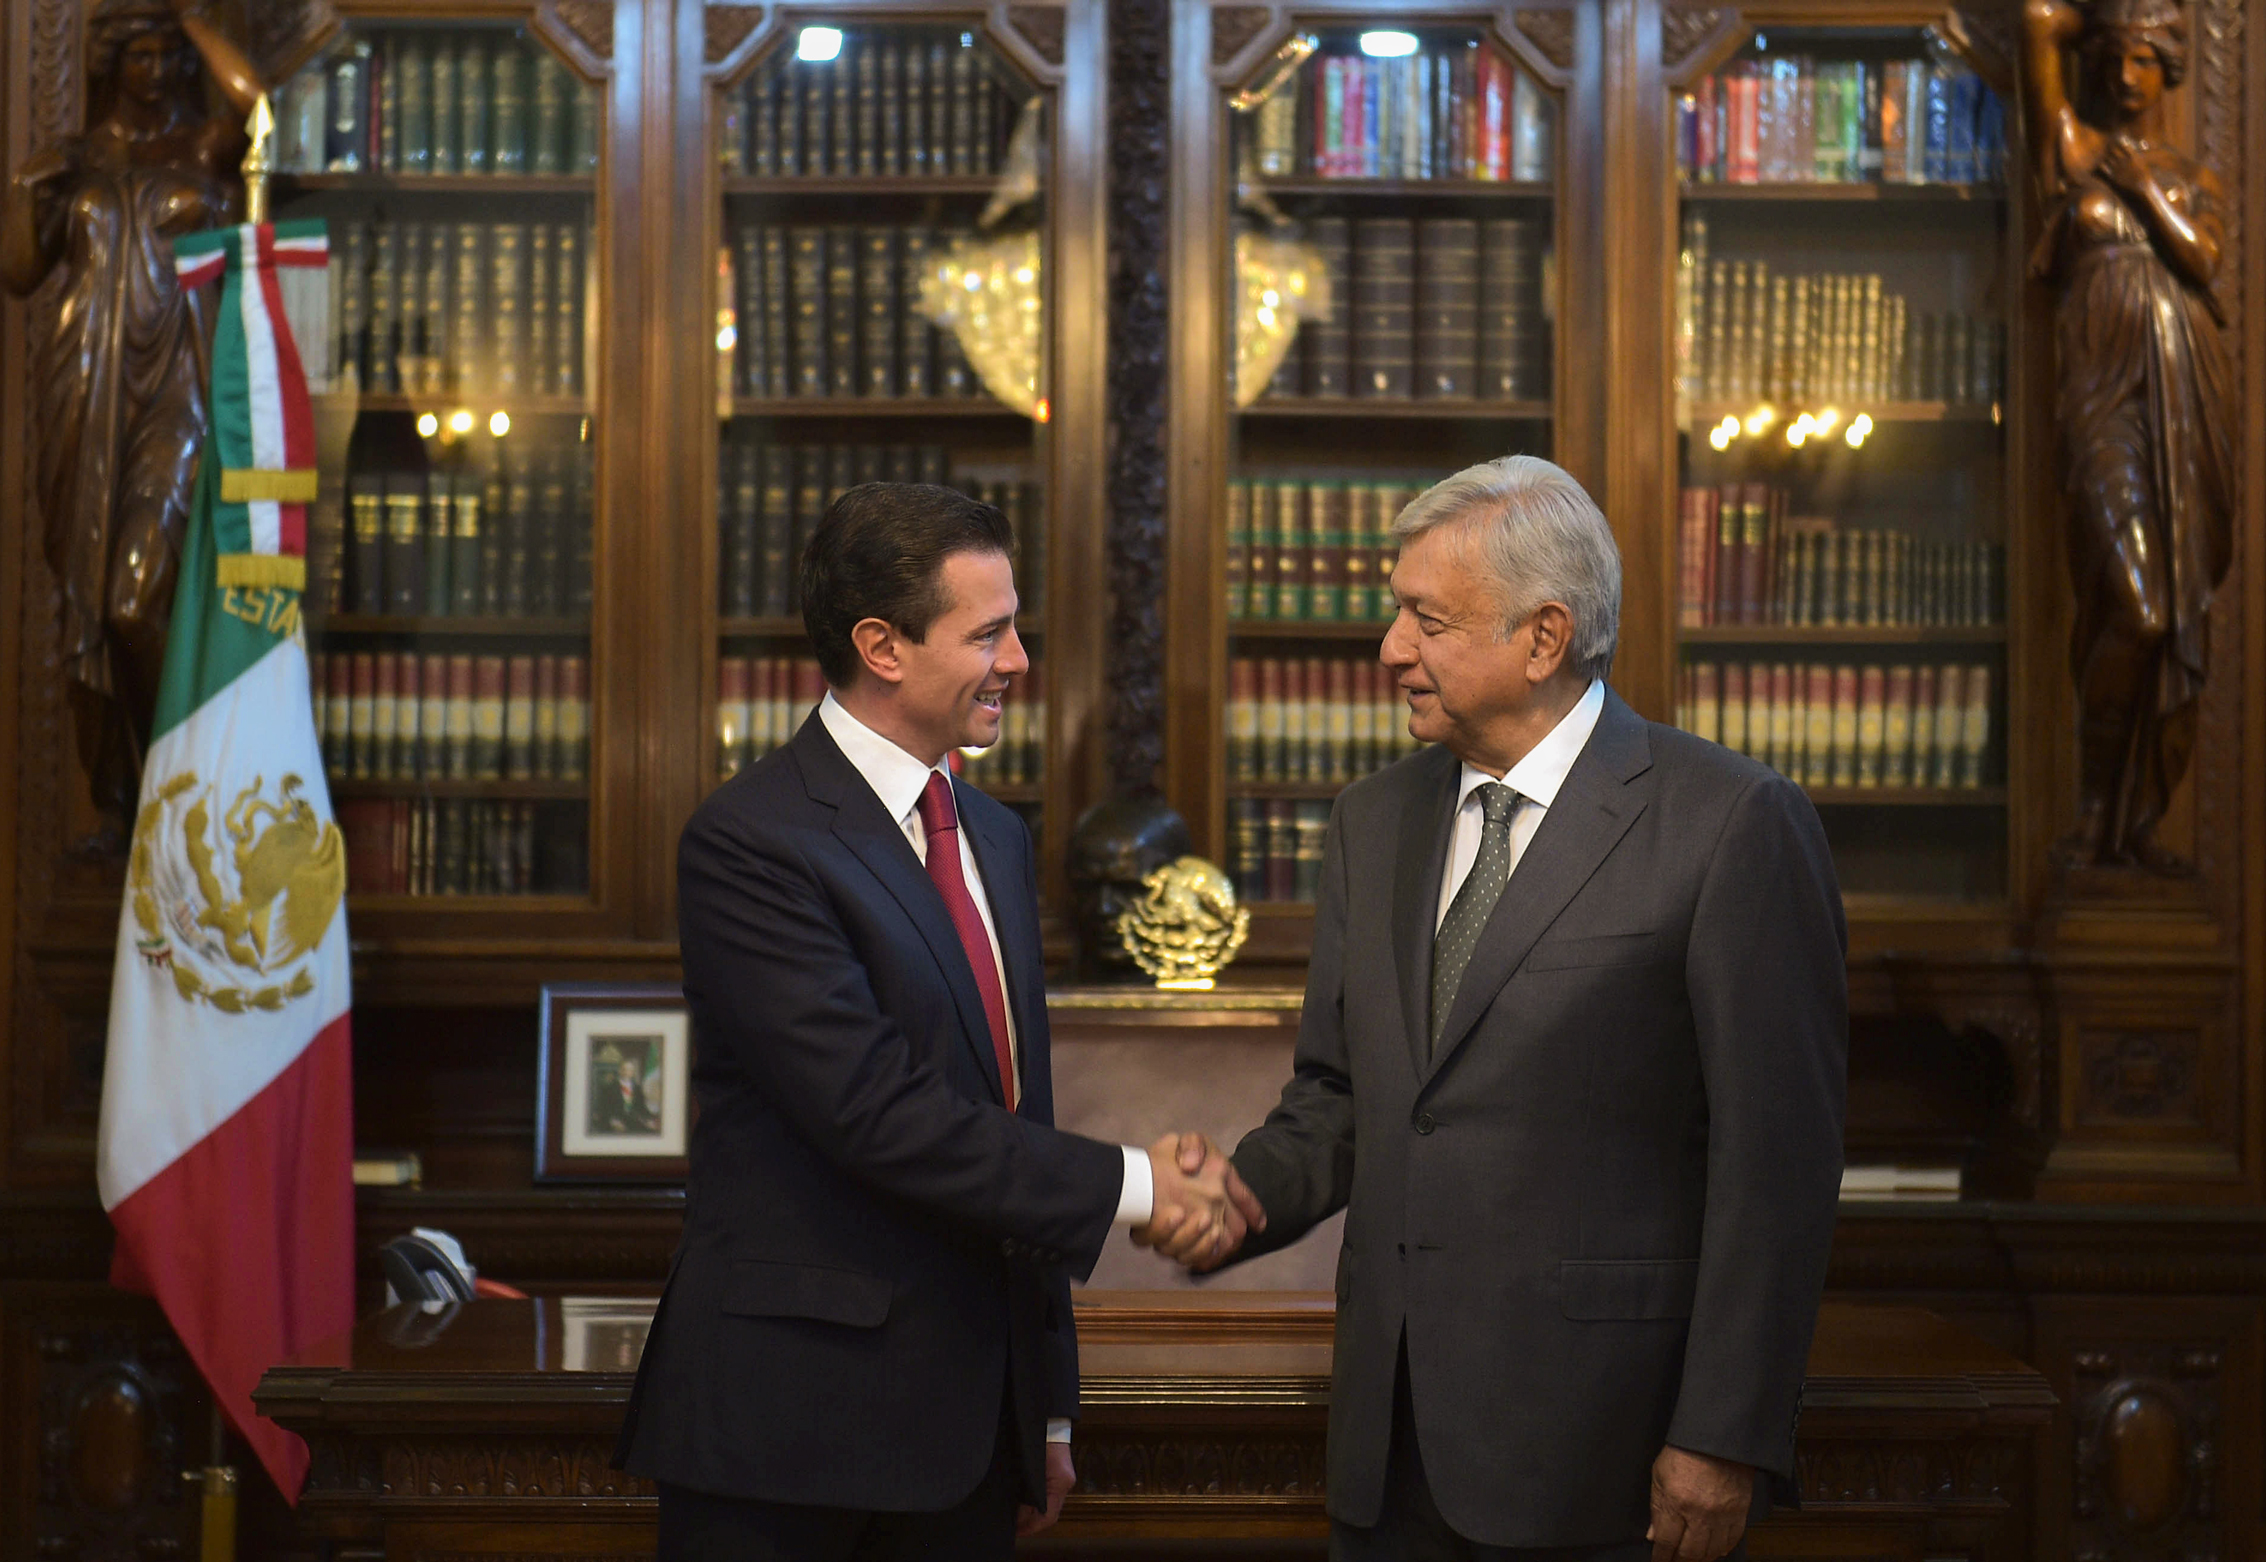 The Future of Mexico under AMLO - Foreign Policy Research Institute2266 x 1562